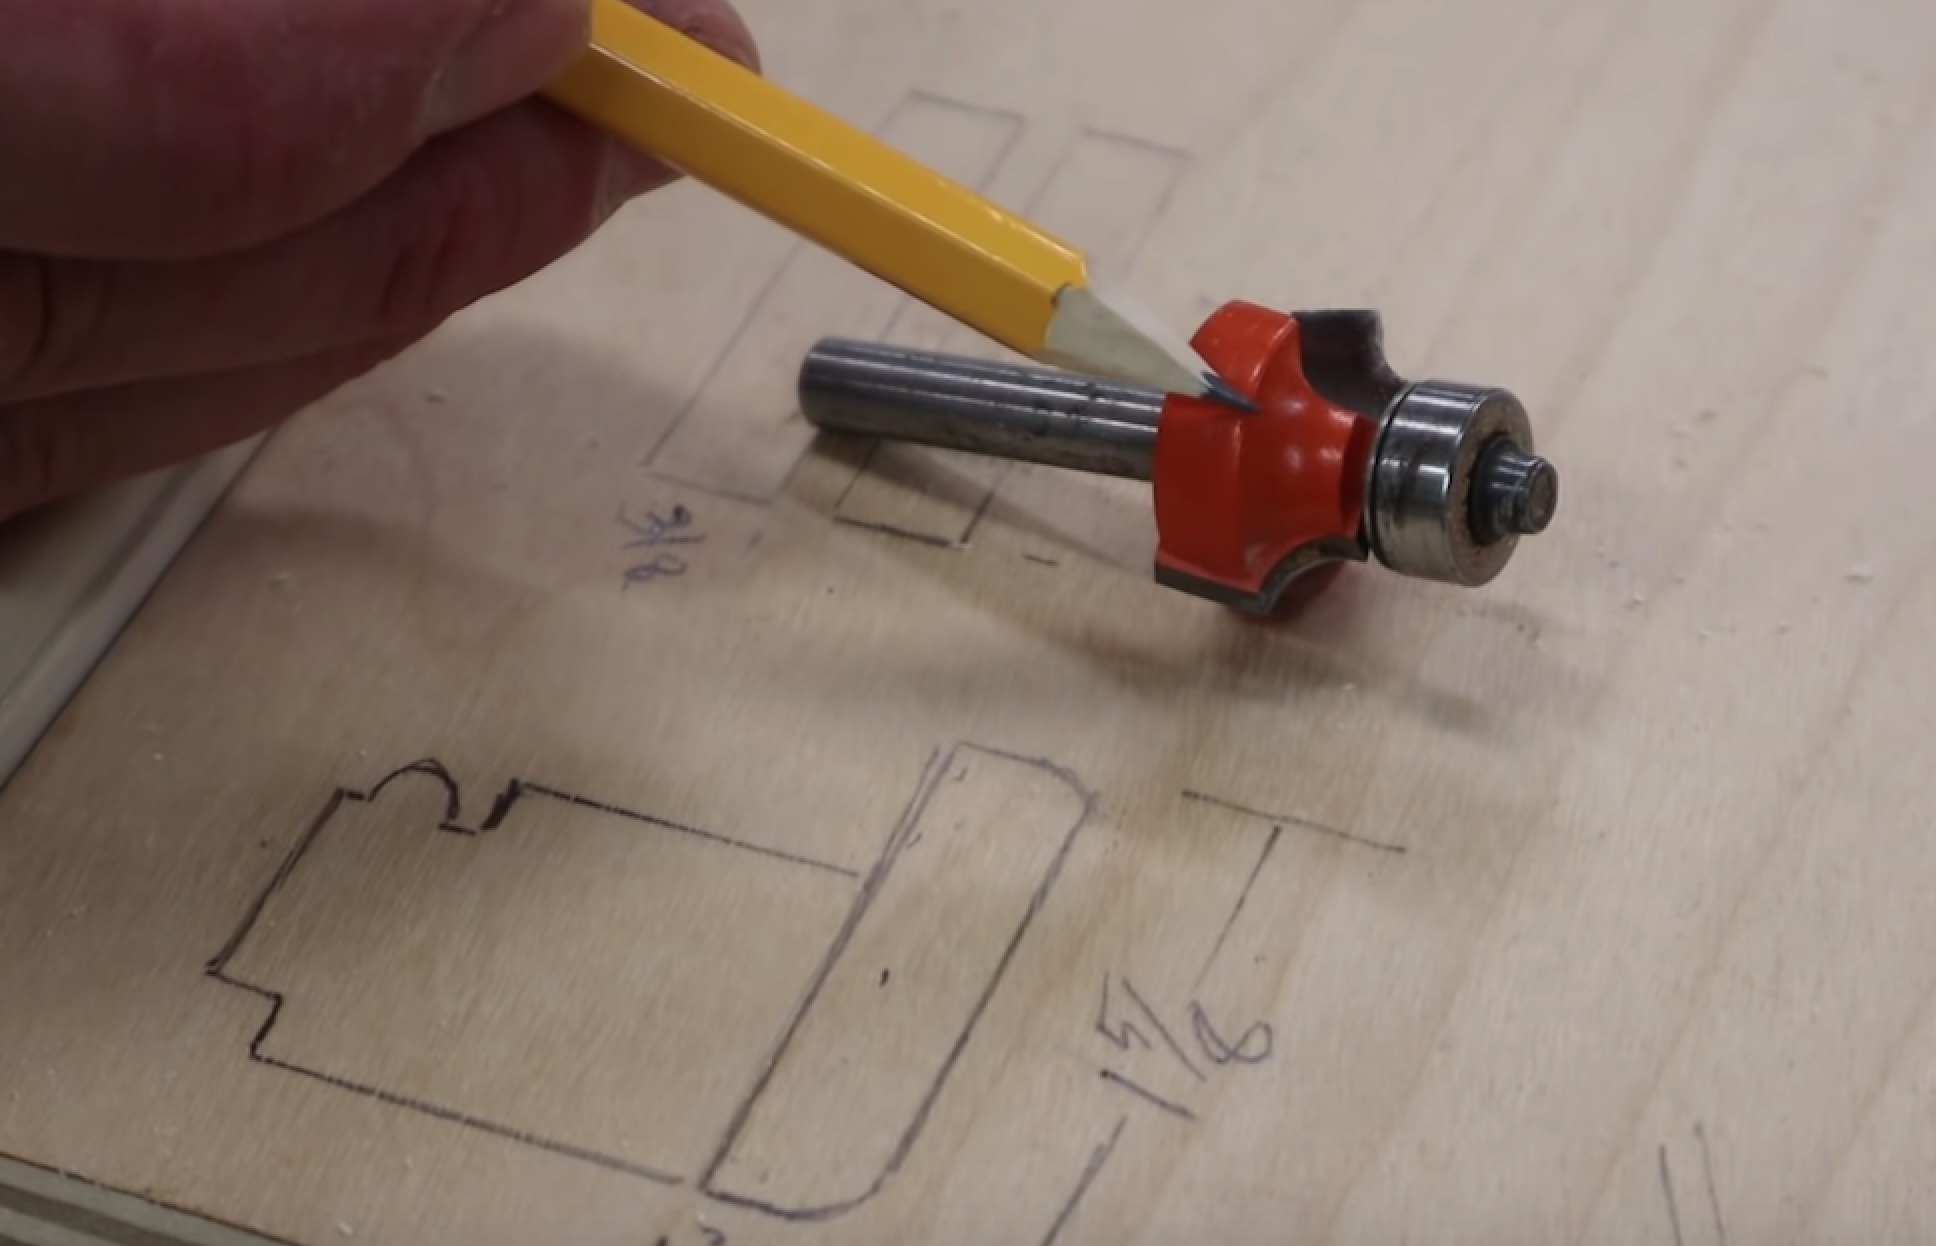 How to Make Molding with a Router & Build a Picture Frame - Free Design Plans - Jon ...1936 x 1246